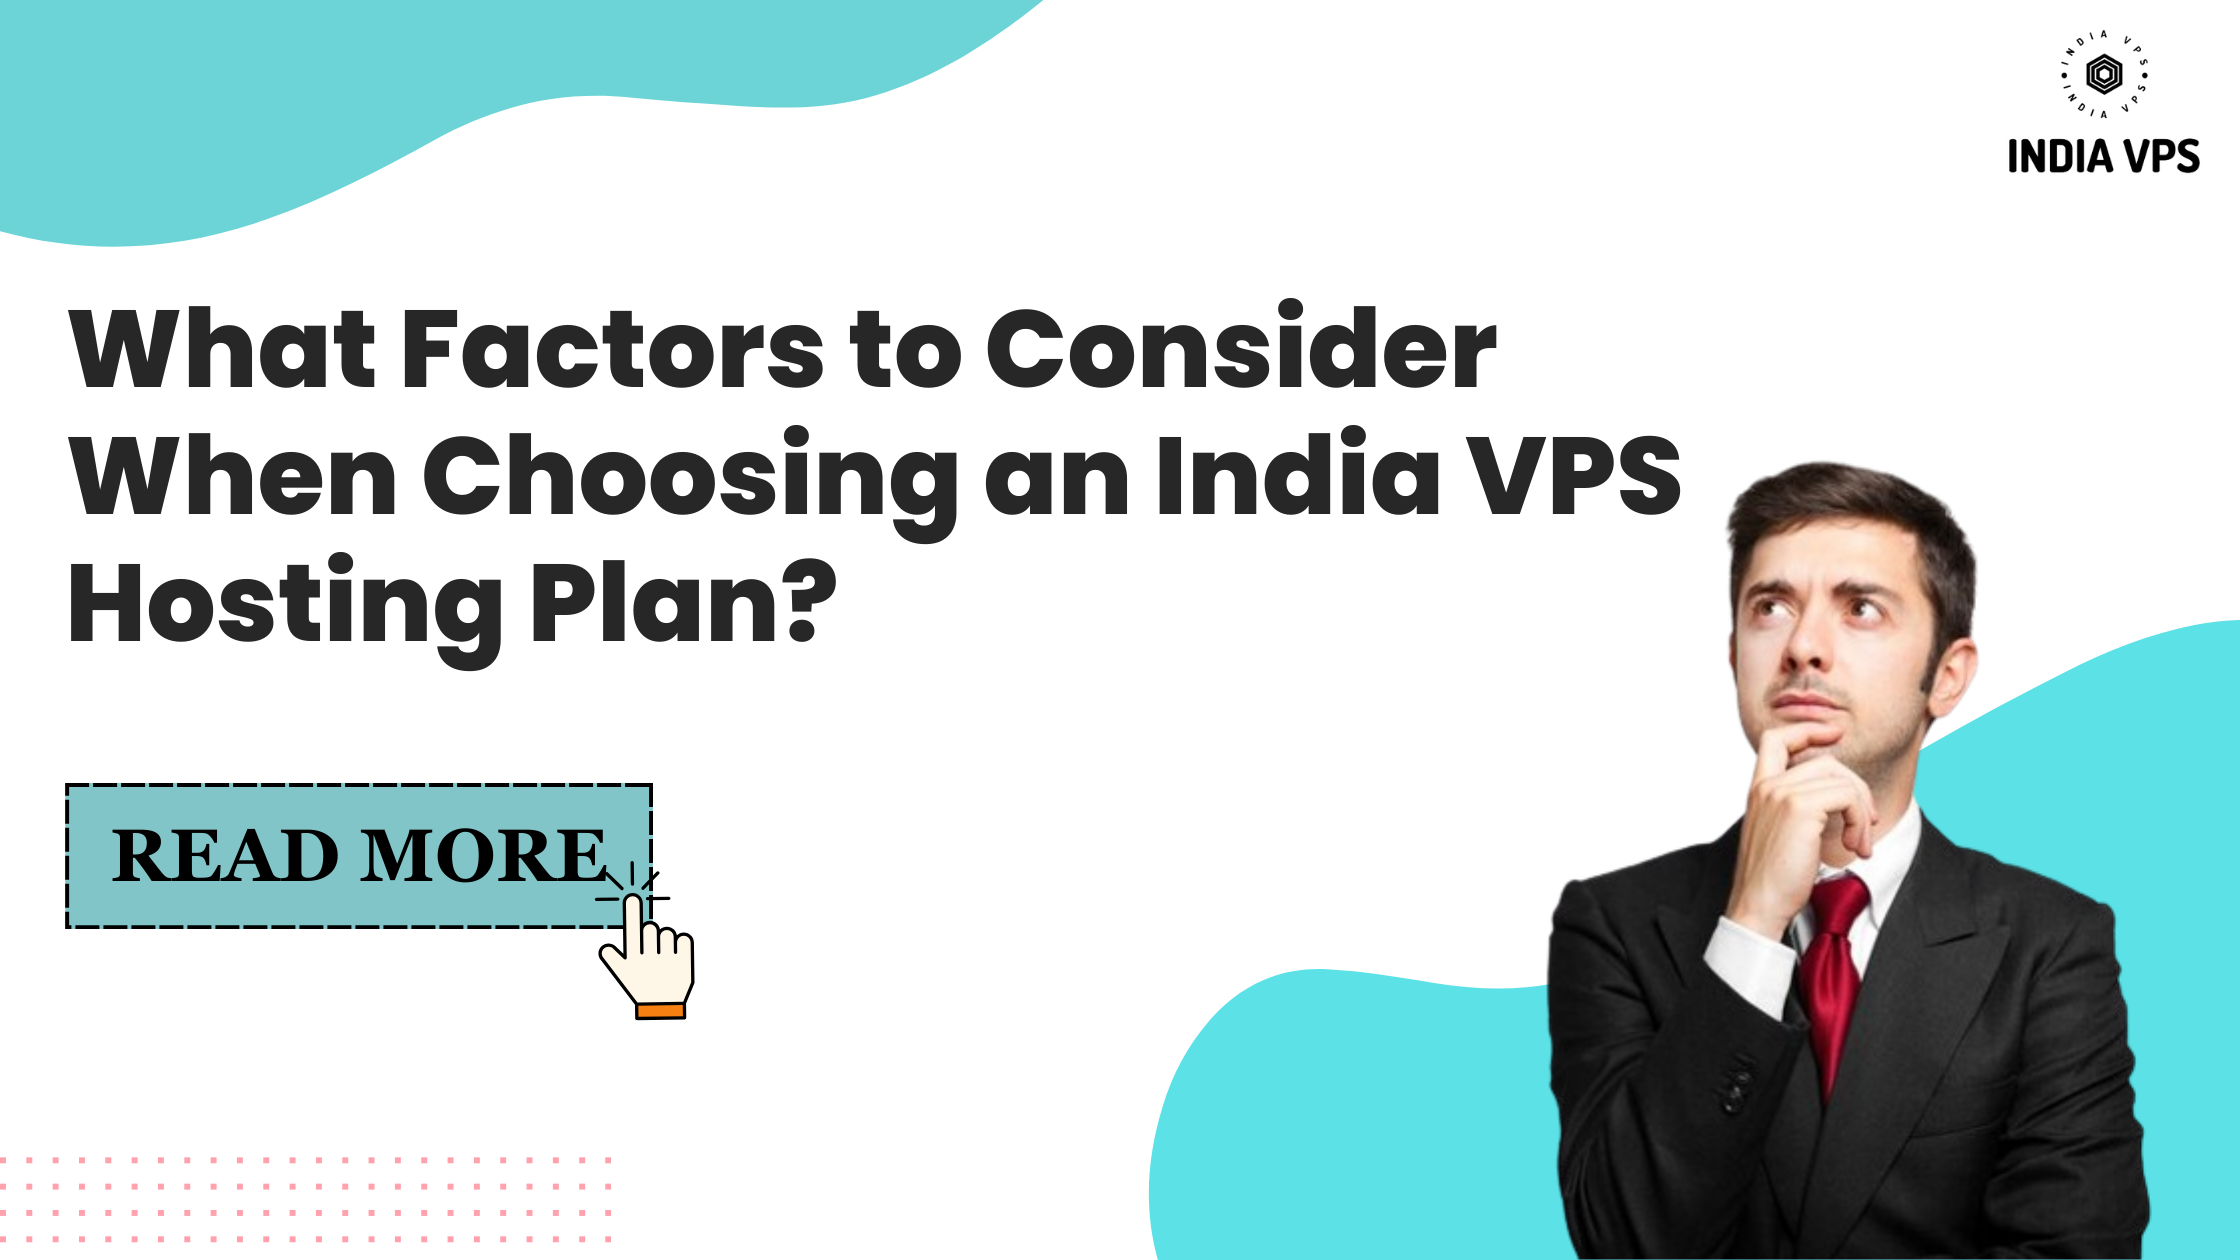 What Factors to Consider When Choosing an India VPS Hosting Plan